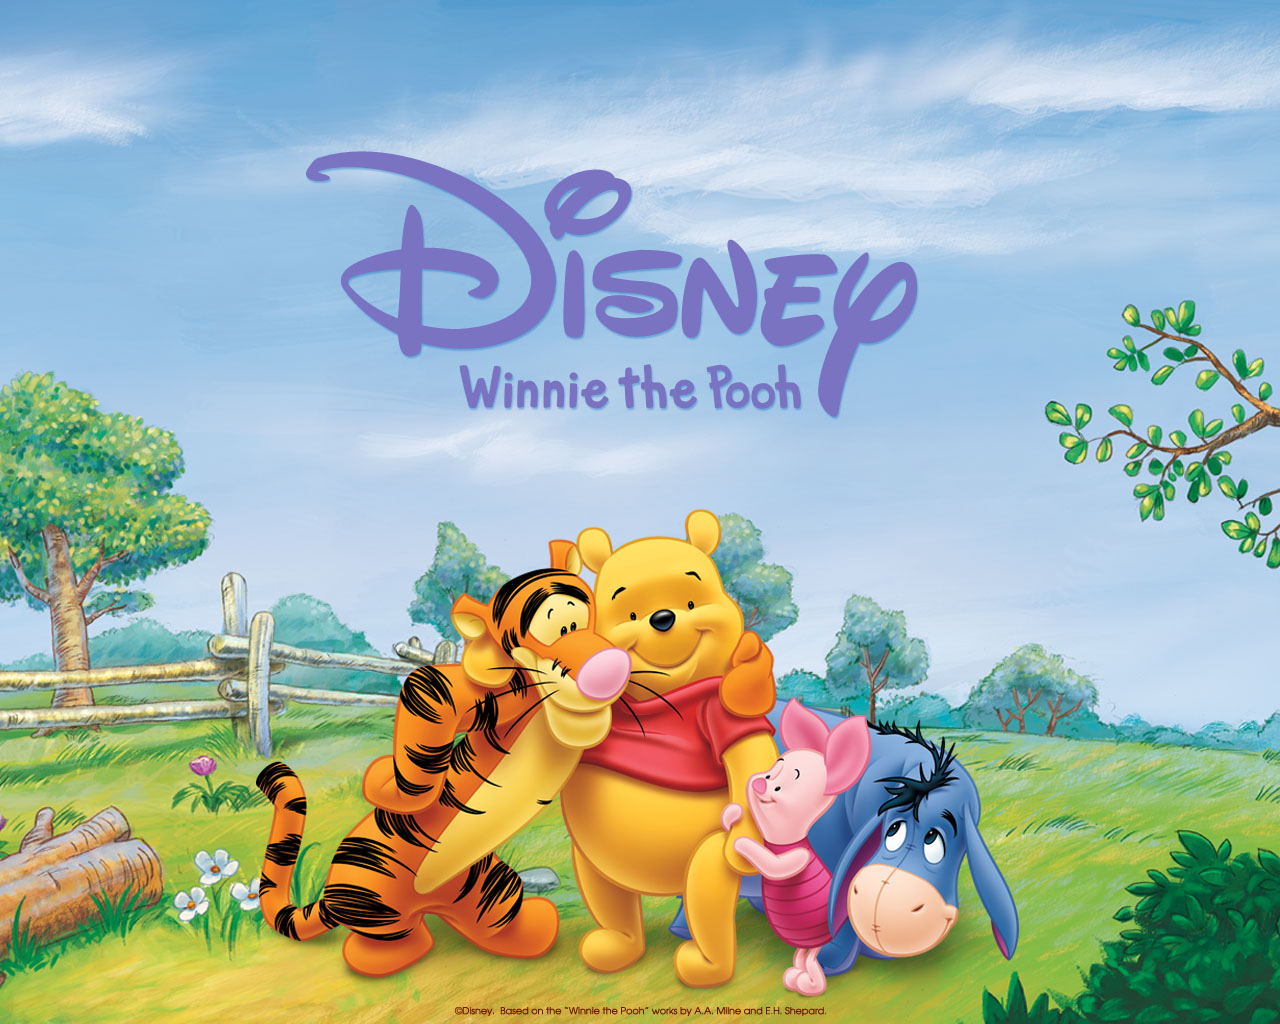 Winnie the pooh HD wallpapers free download  Wallpaperbetter